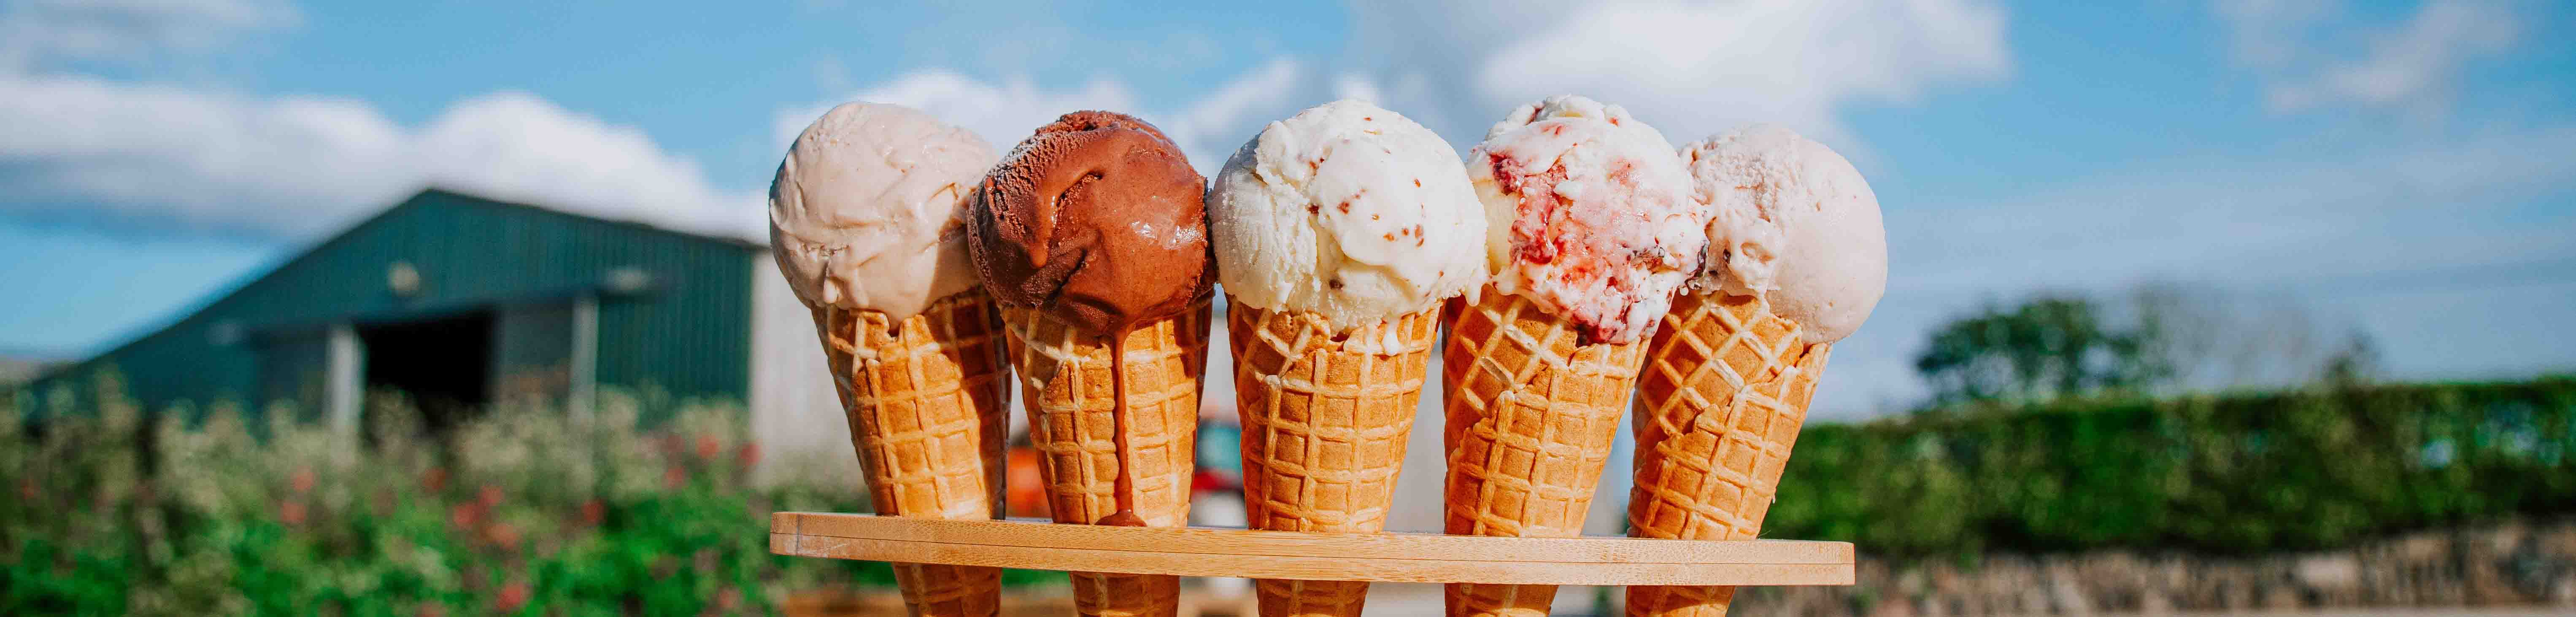 A National treasure and taste of pleasure: guide to ice cream in Cornwall